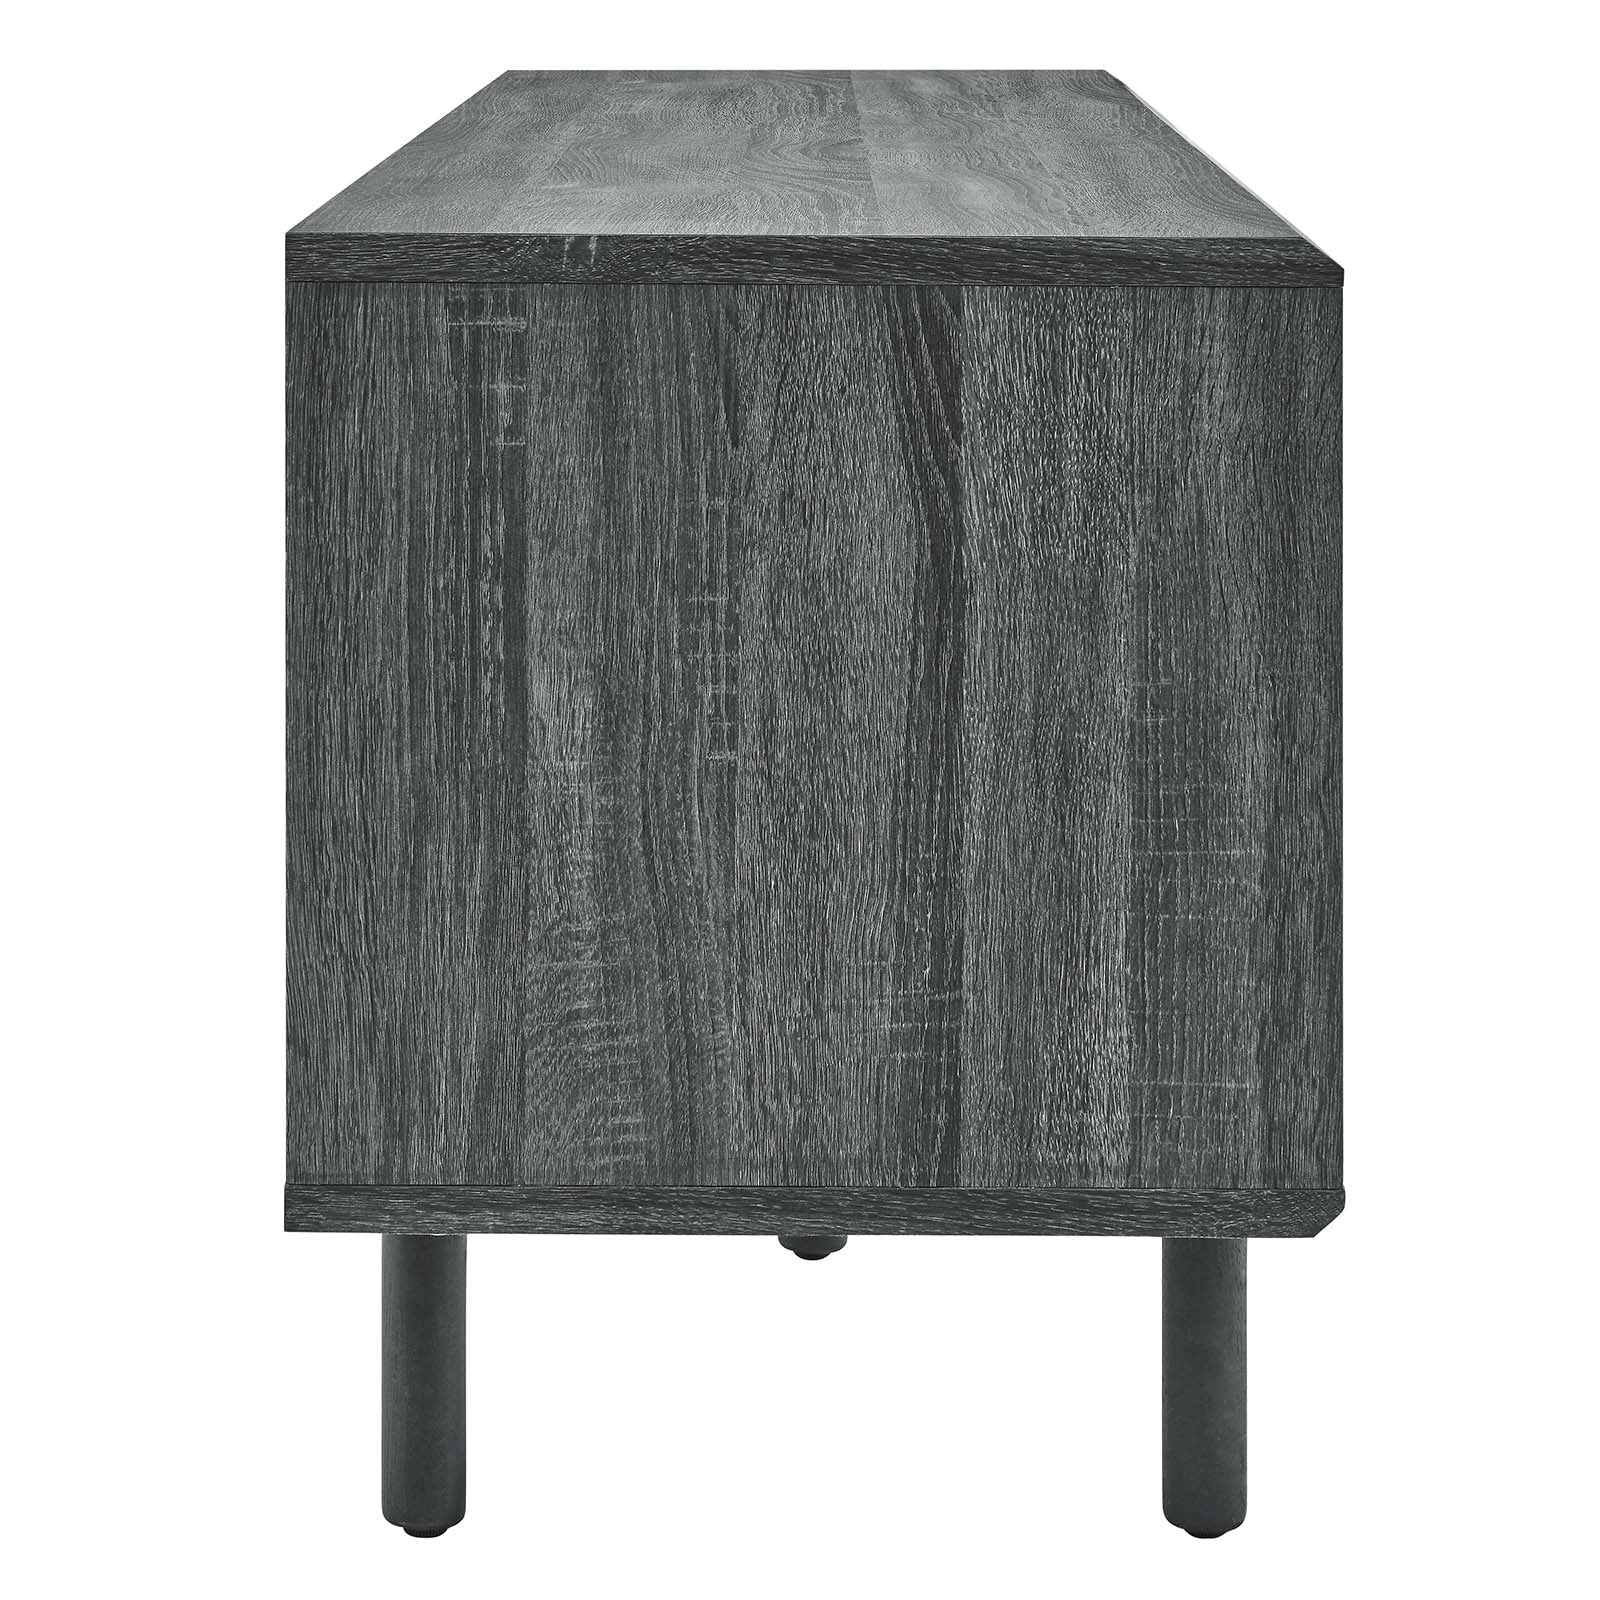 Kurtis 67" TV and Vinyl Record Stand - East Shore Modern Home Furnishings